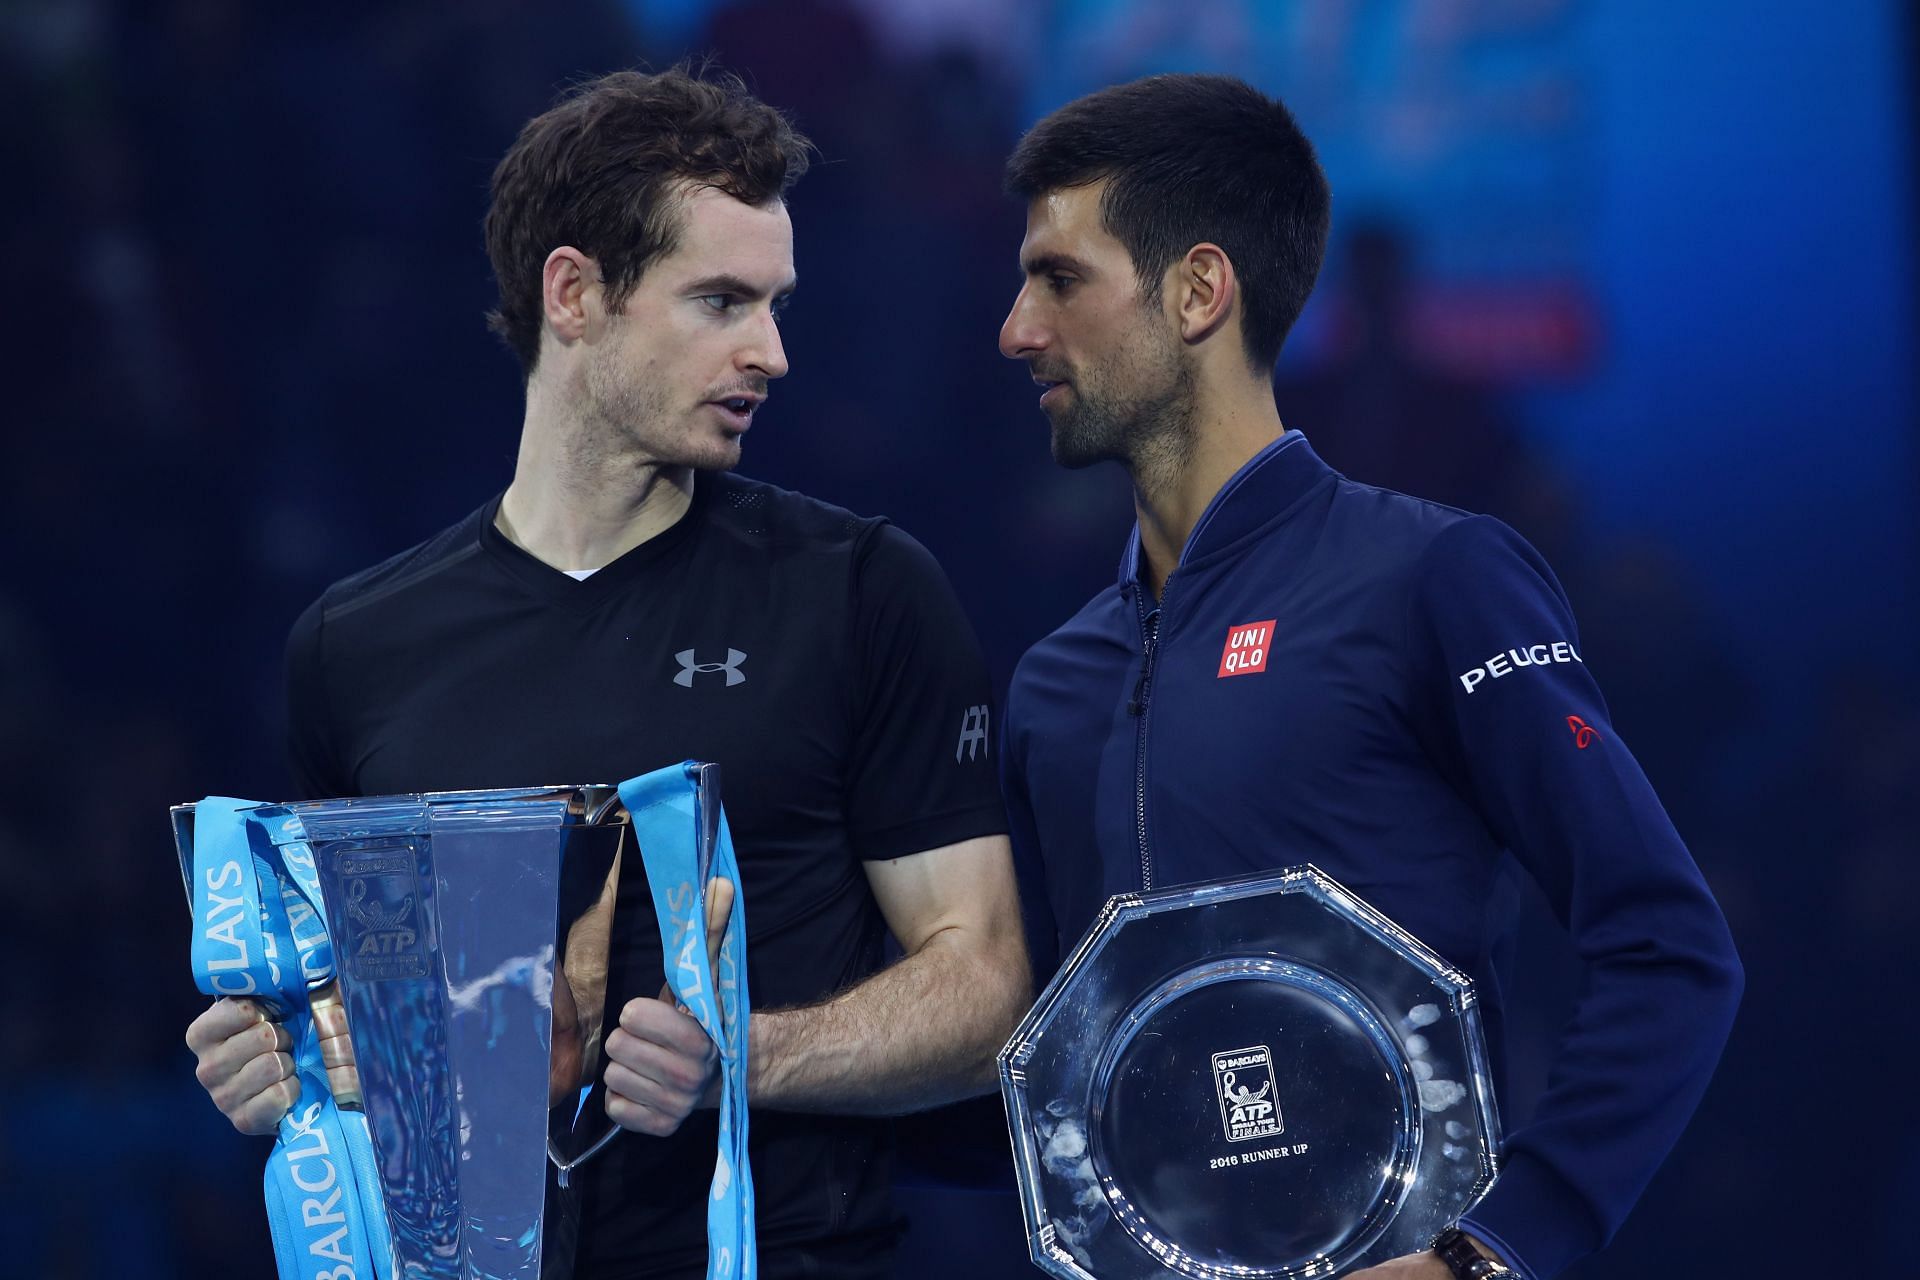 Andy Murray and Djokovic have contested finals in each big event (Masters and Slams)